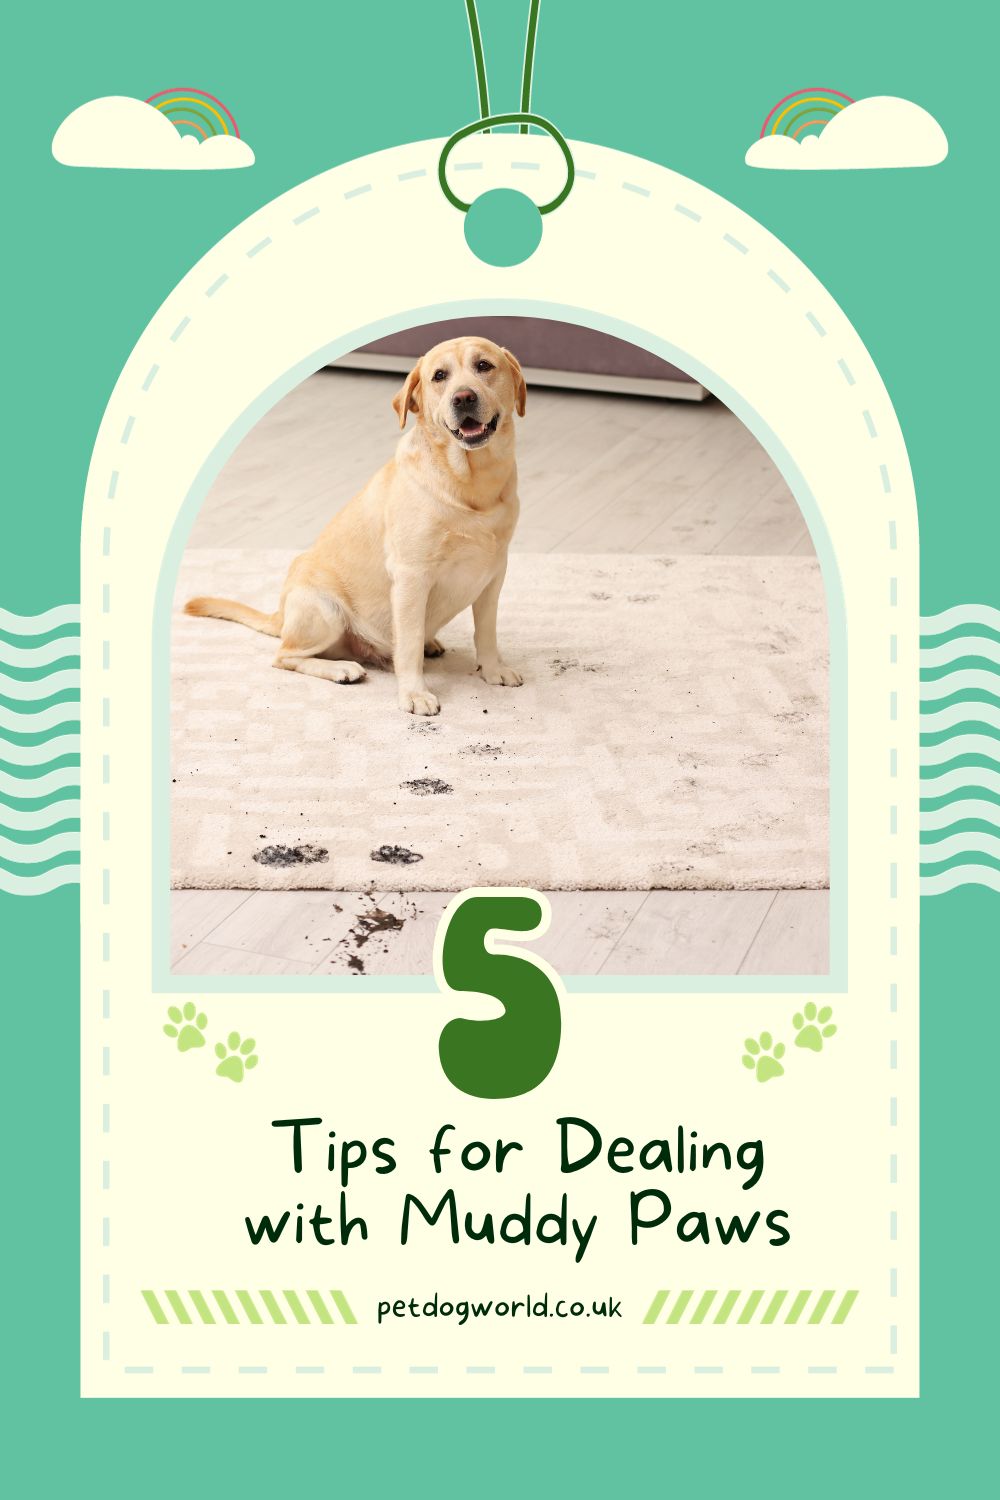 Struggling with a mud-loving dog? Discover 5 tips to keep those paws clean! From avoiding mud to training tricks, reclaim a mud-free home effortlessly.